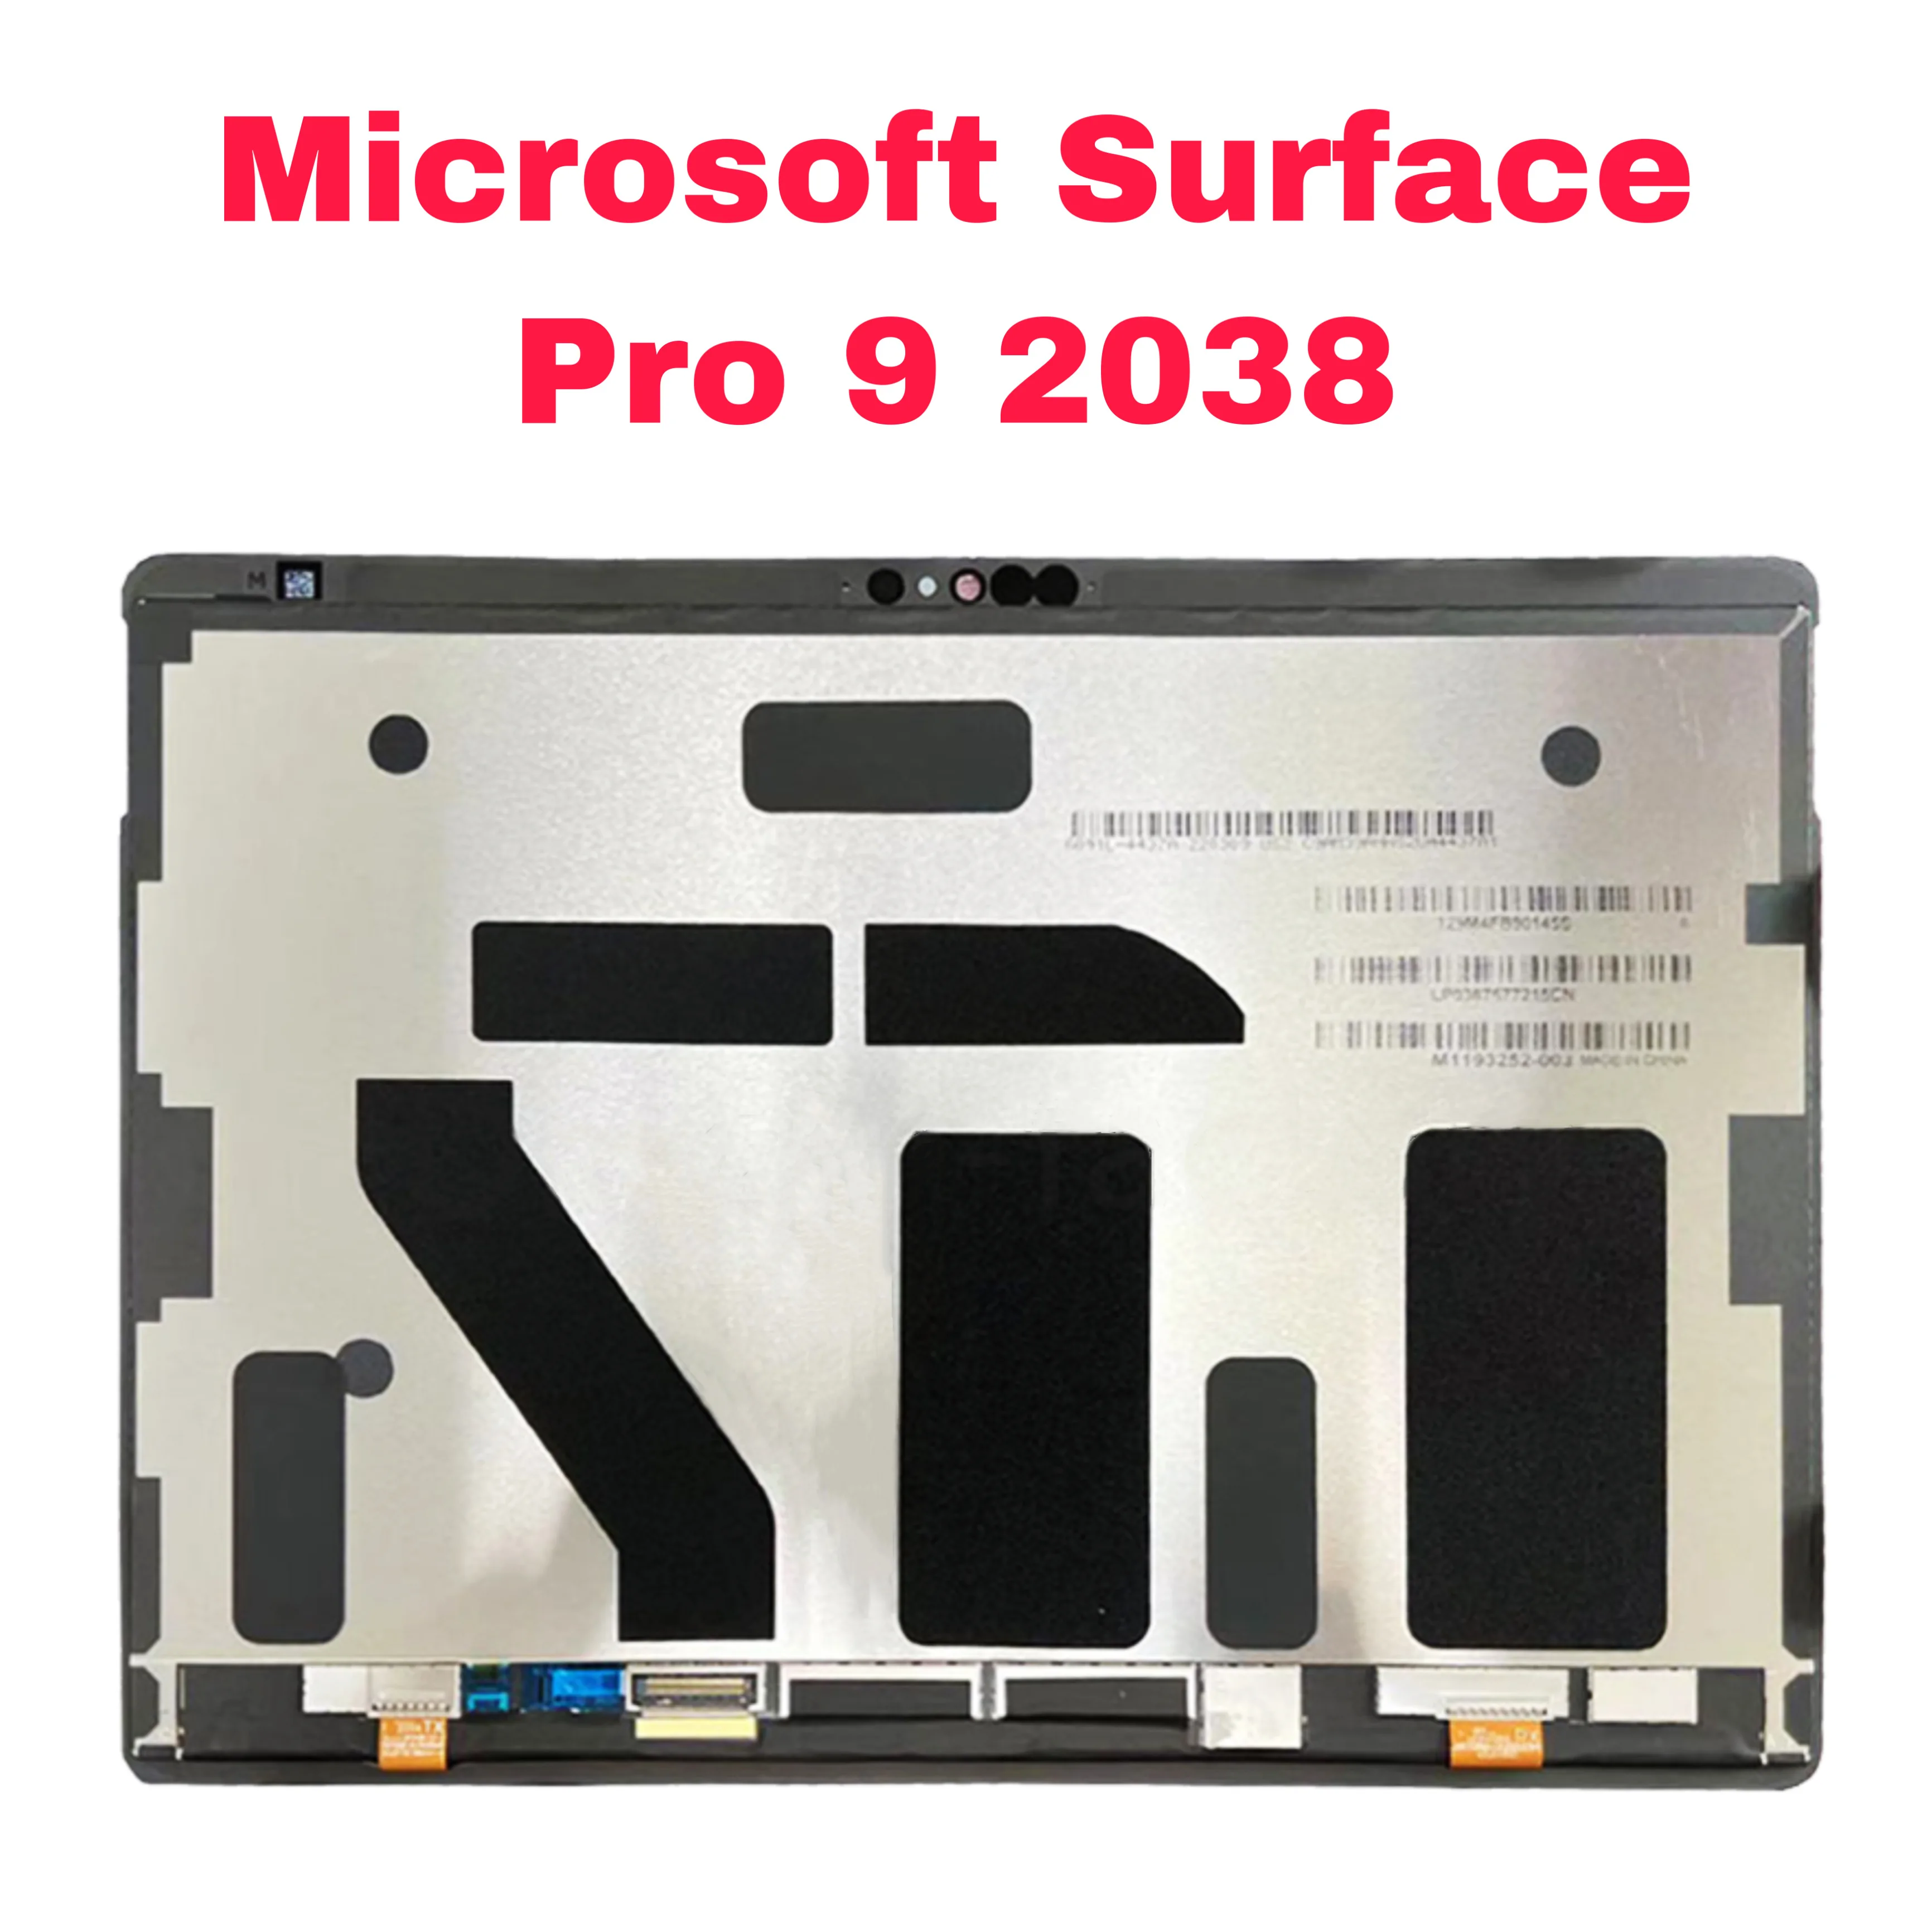 

New 13" For Microsoft Surface Pro 9 LCD Display Touch Screen Digitizer Assembly For Surface Pro 9 2038 Glass Replace